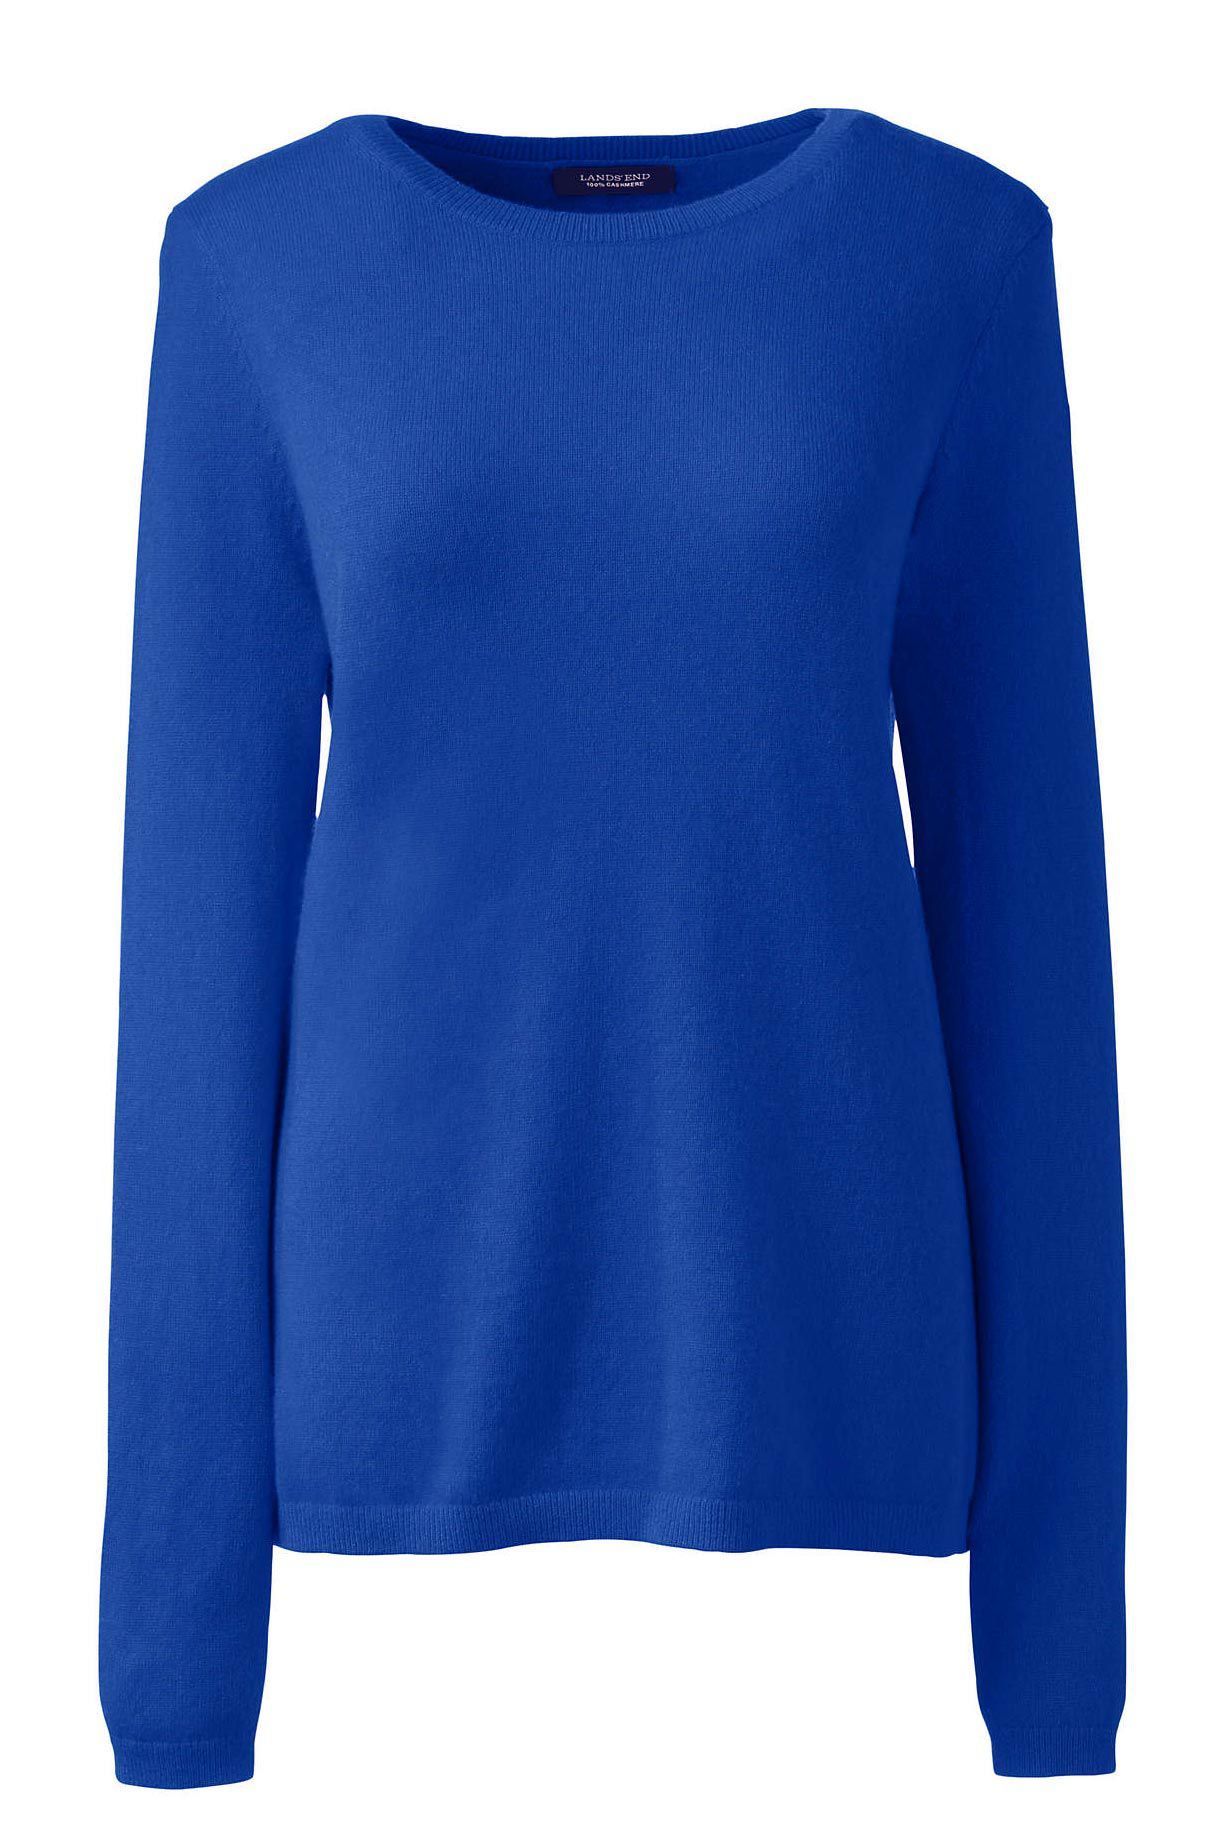 7 Best Cashmere Sweaters 2020 - Top Cashmere Pullovers for Women